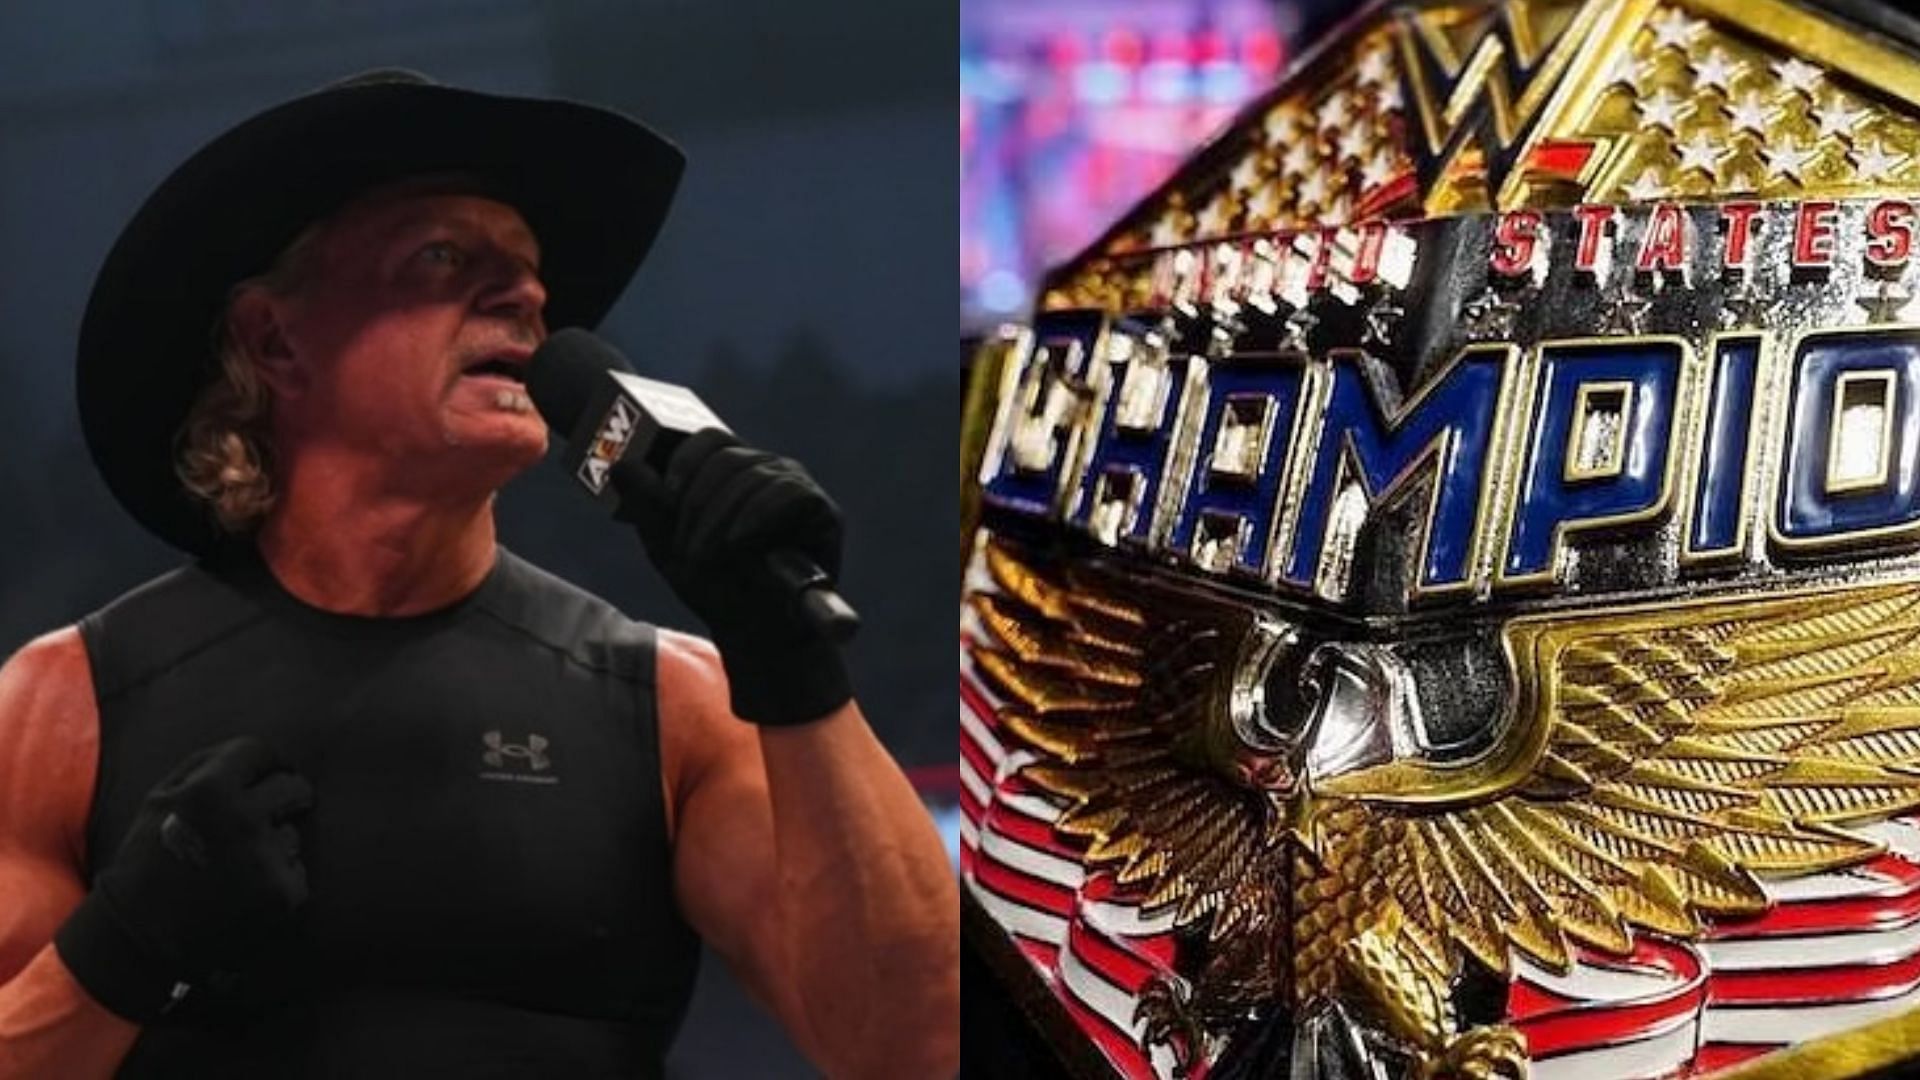 Jeff Jarrett gives his opinion about a former WWE US Champion